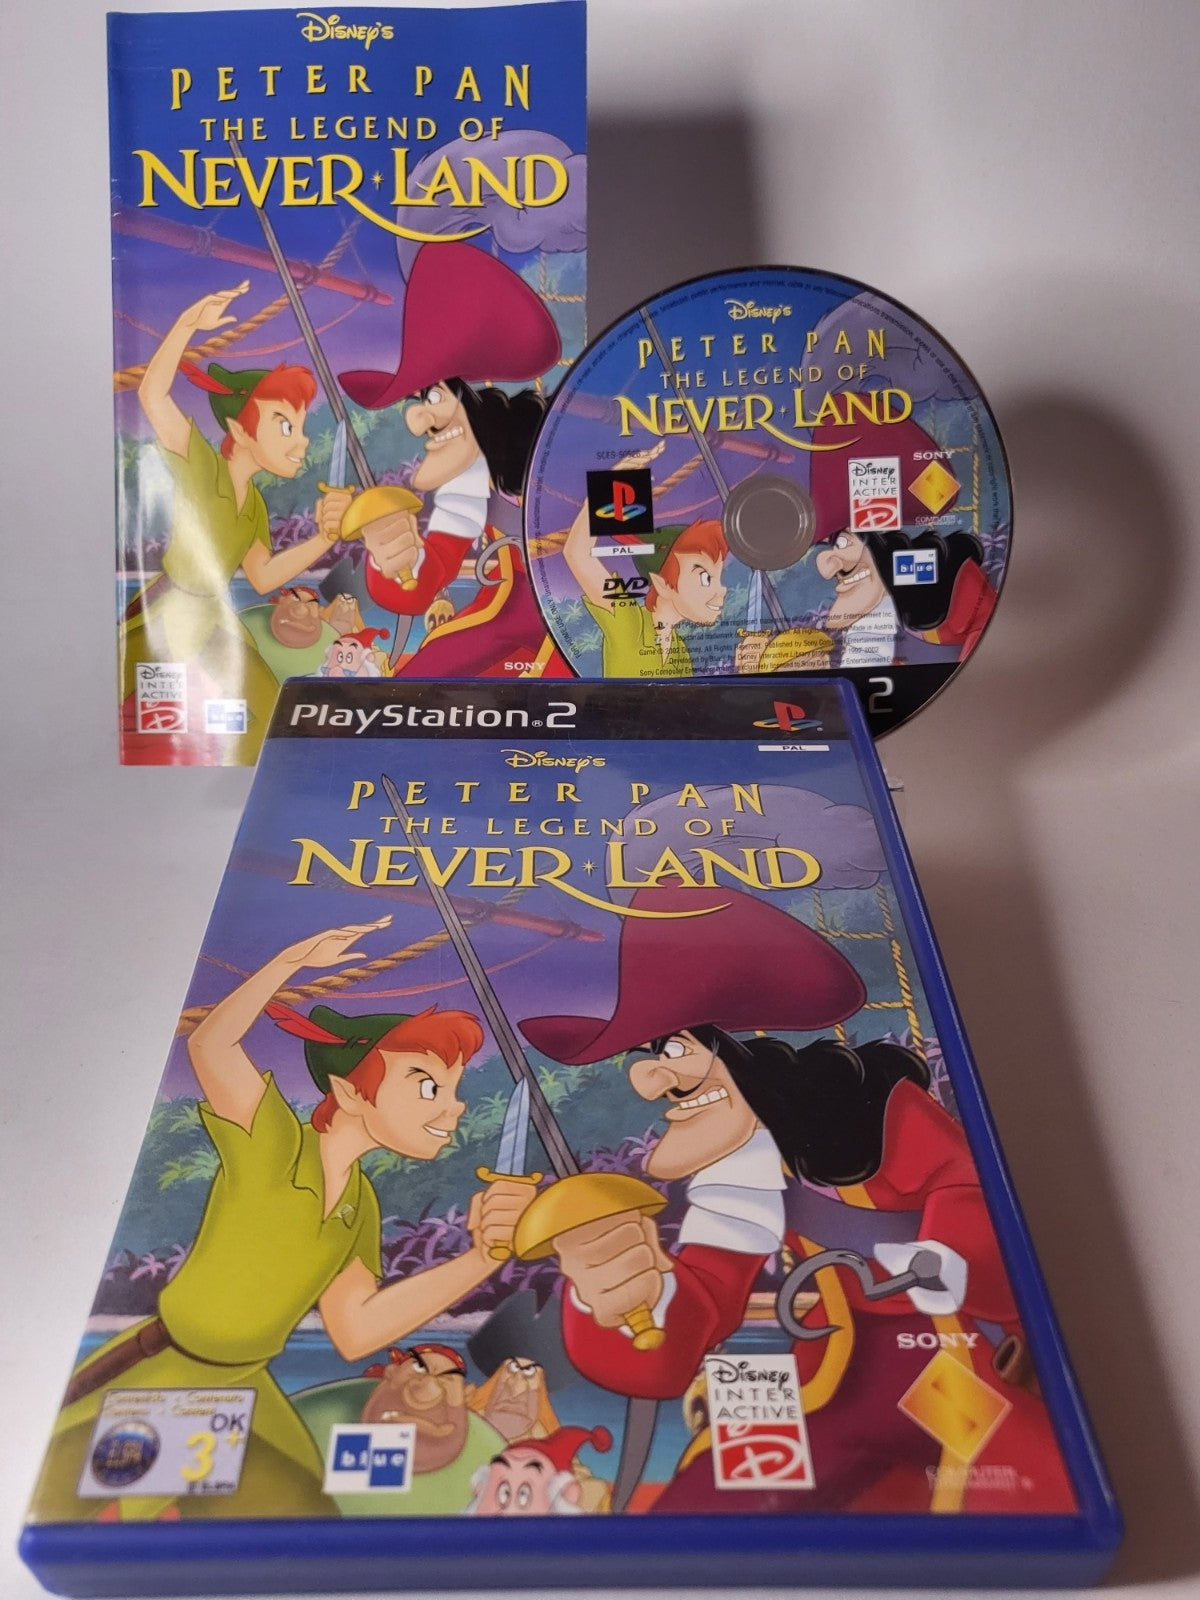 Disney's Peter Pan - the Legend of Never Land Playstation 2